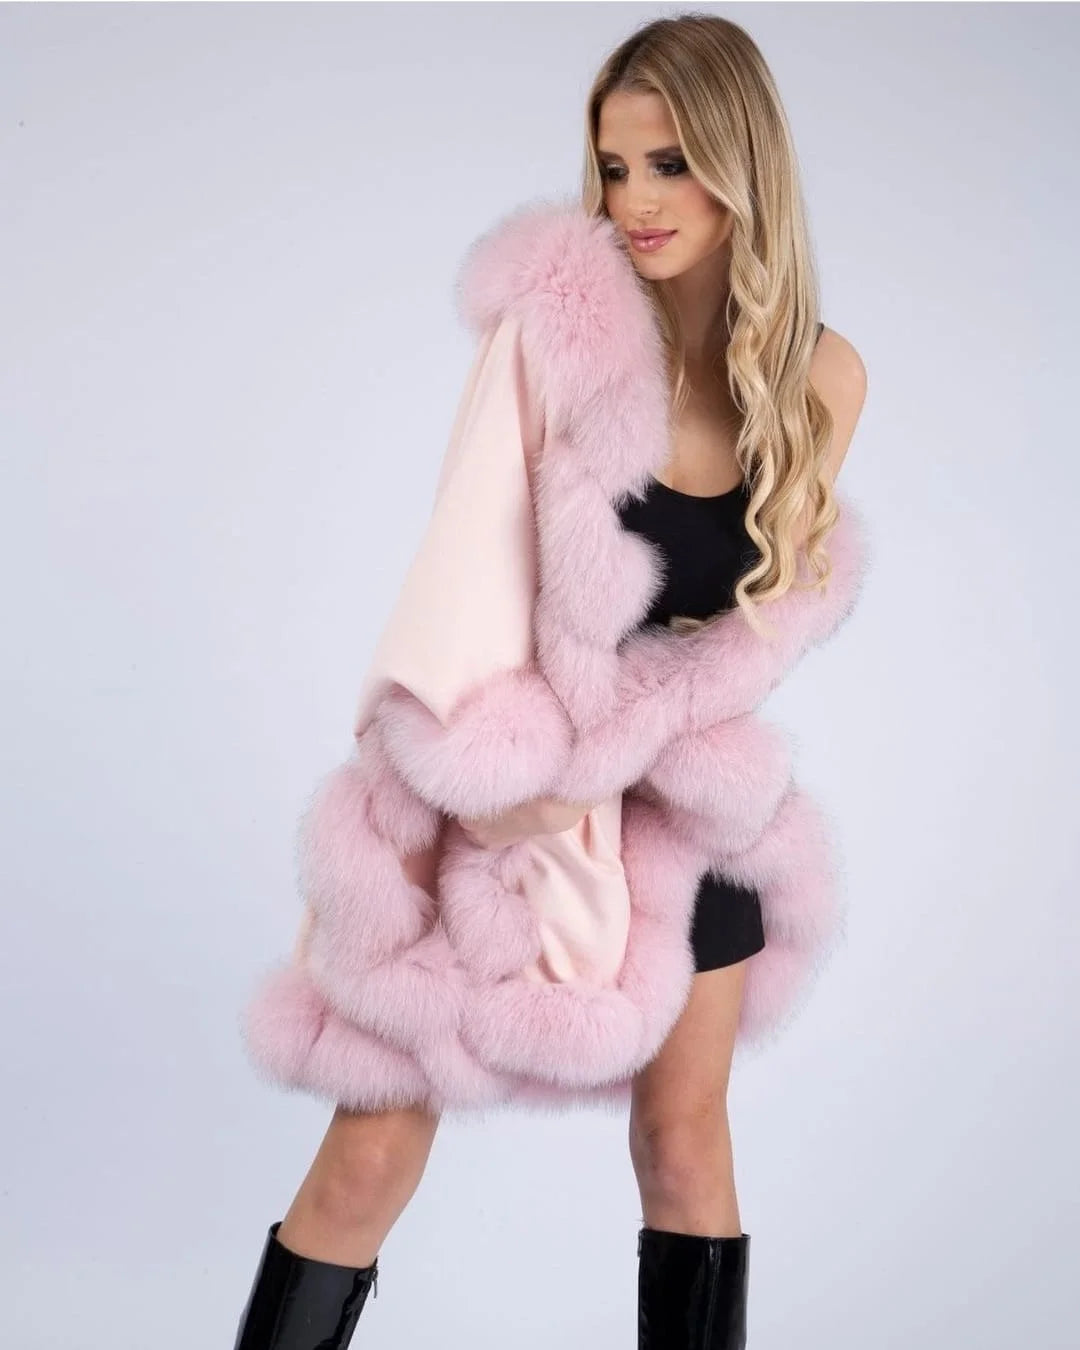 Vibrant Pink Cashmere Wool Scarf with Fox Fur Trim